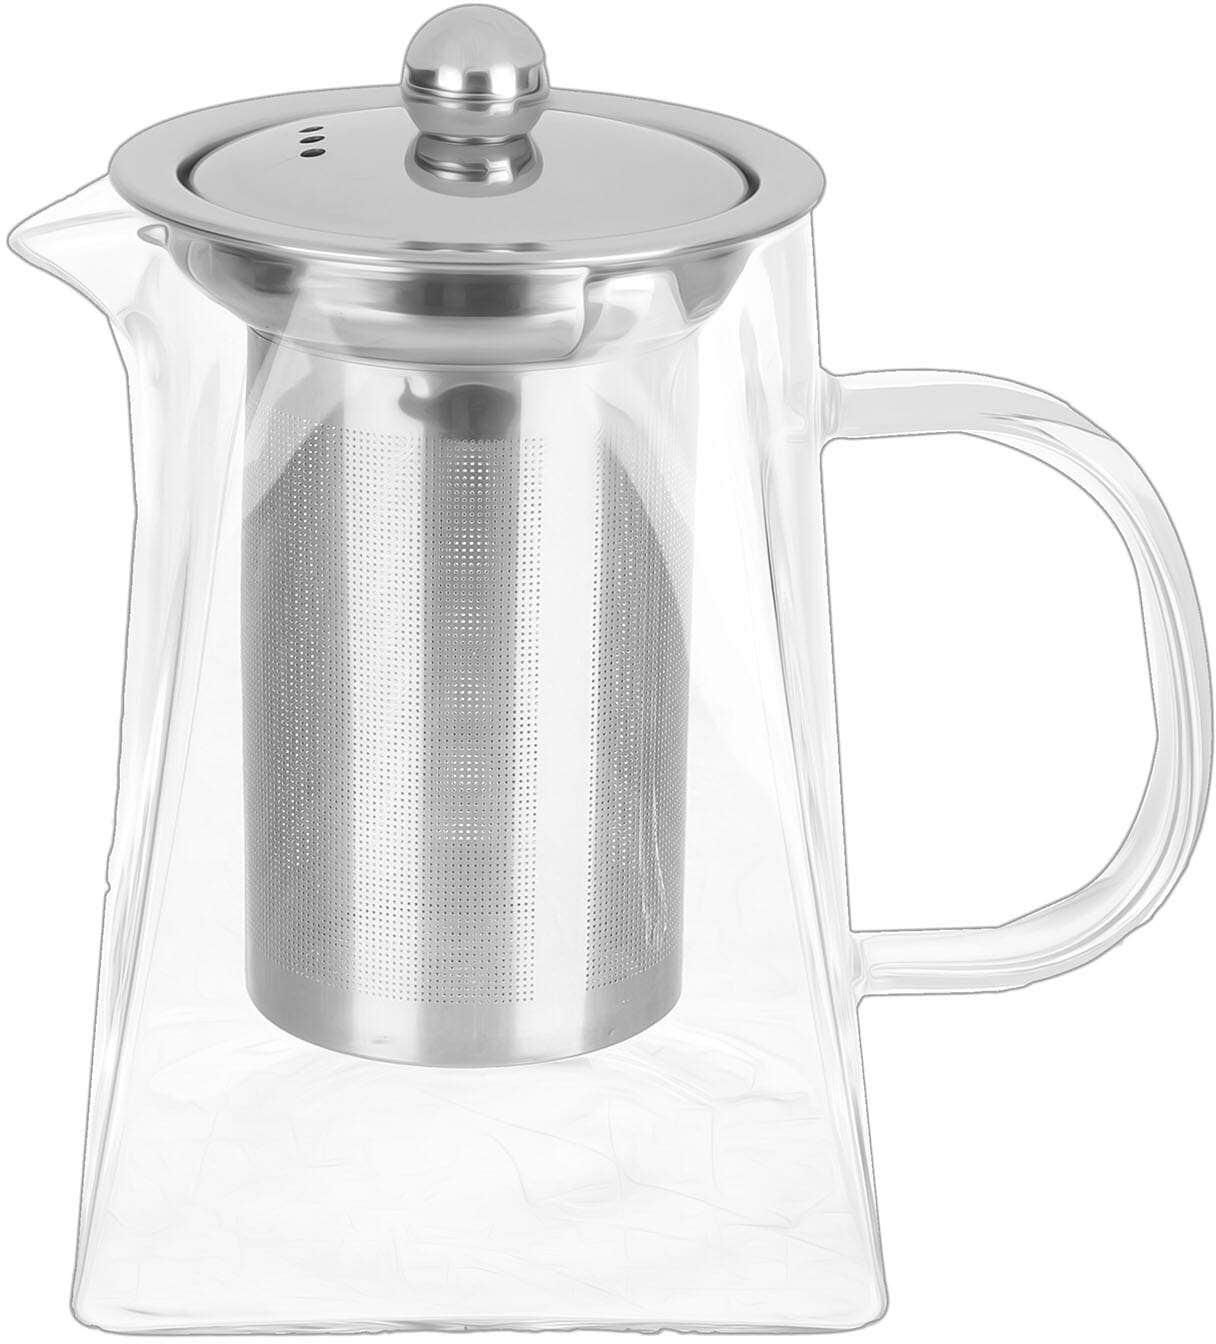 Get Oxford Thermal Glass Jug With Stainless Steel Lid And Strainer, 750 ml - Clear with best offers | Raneen.com